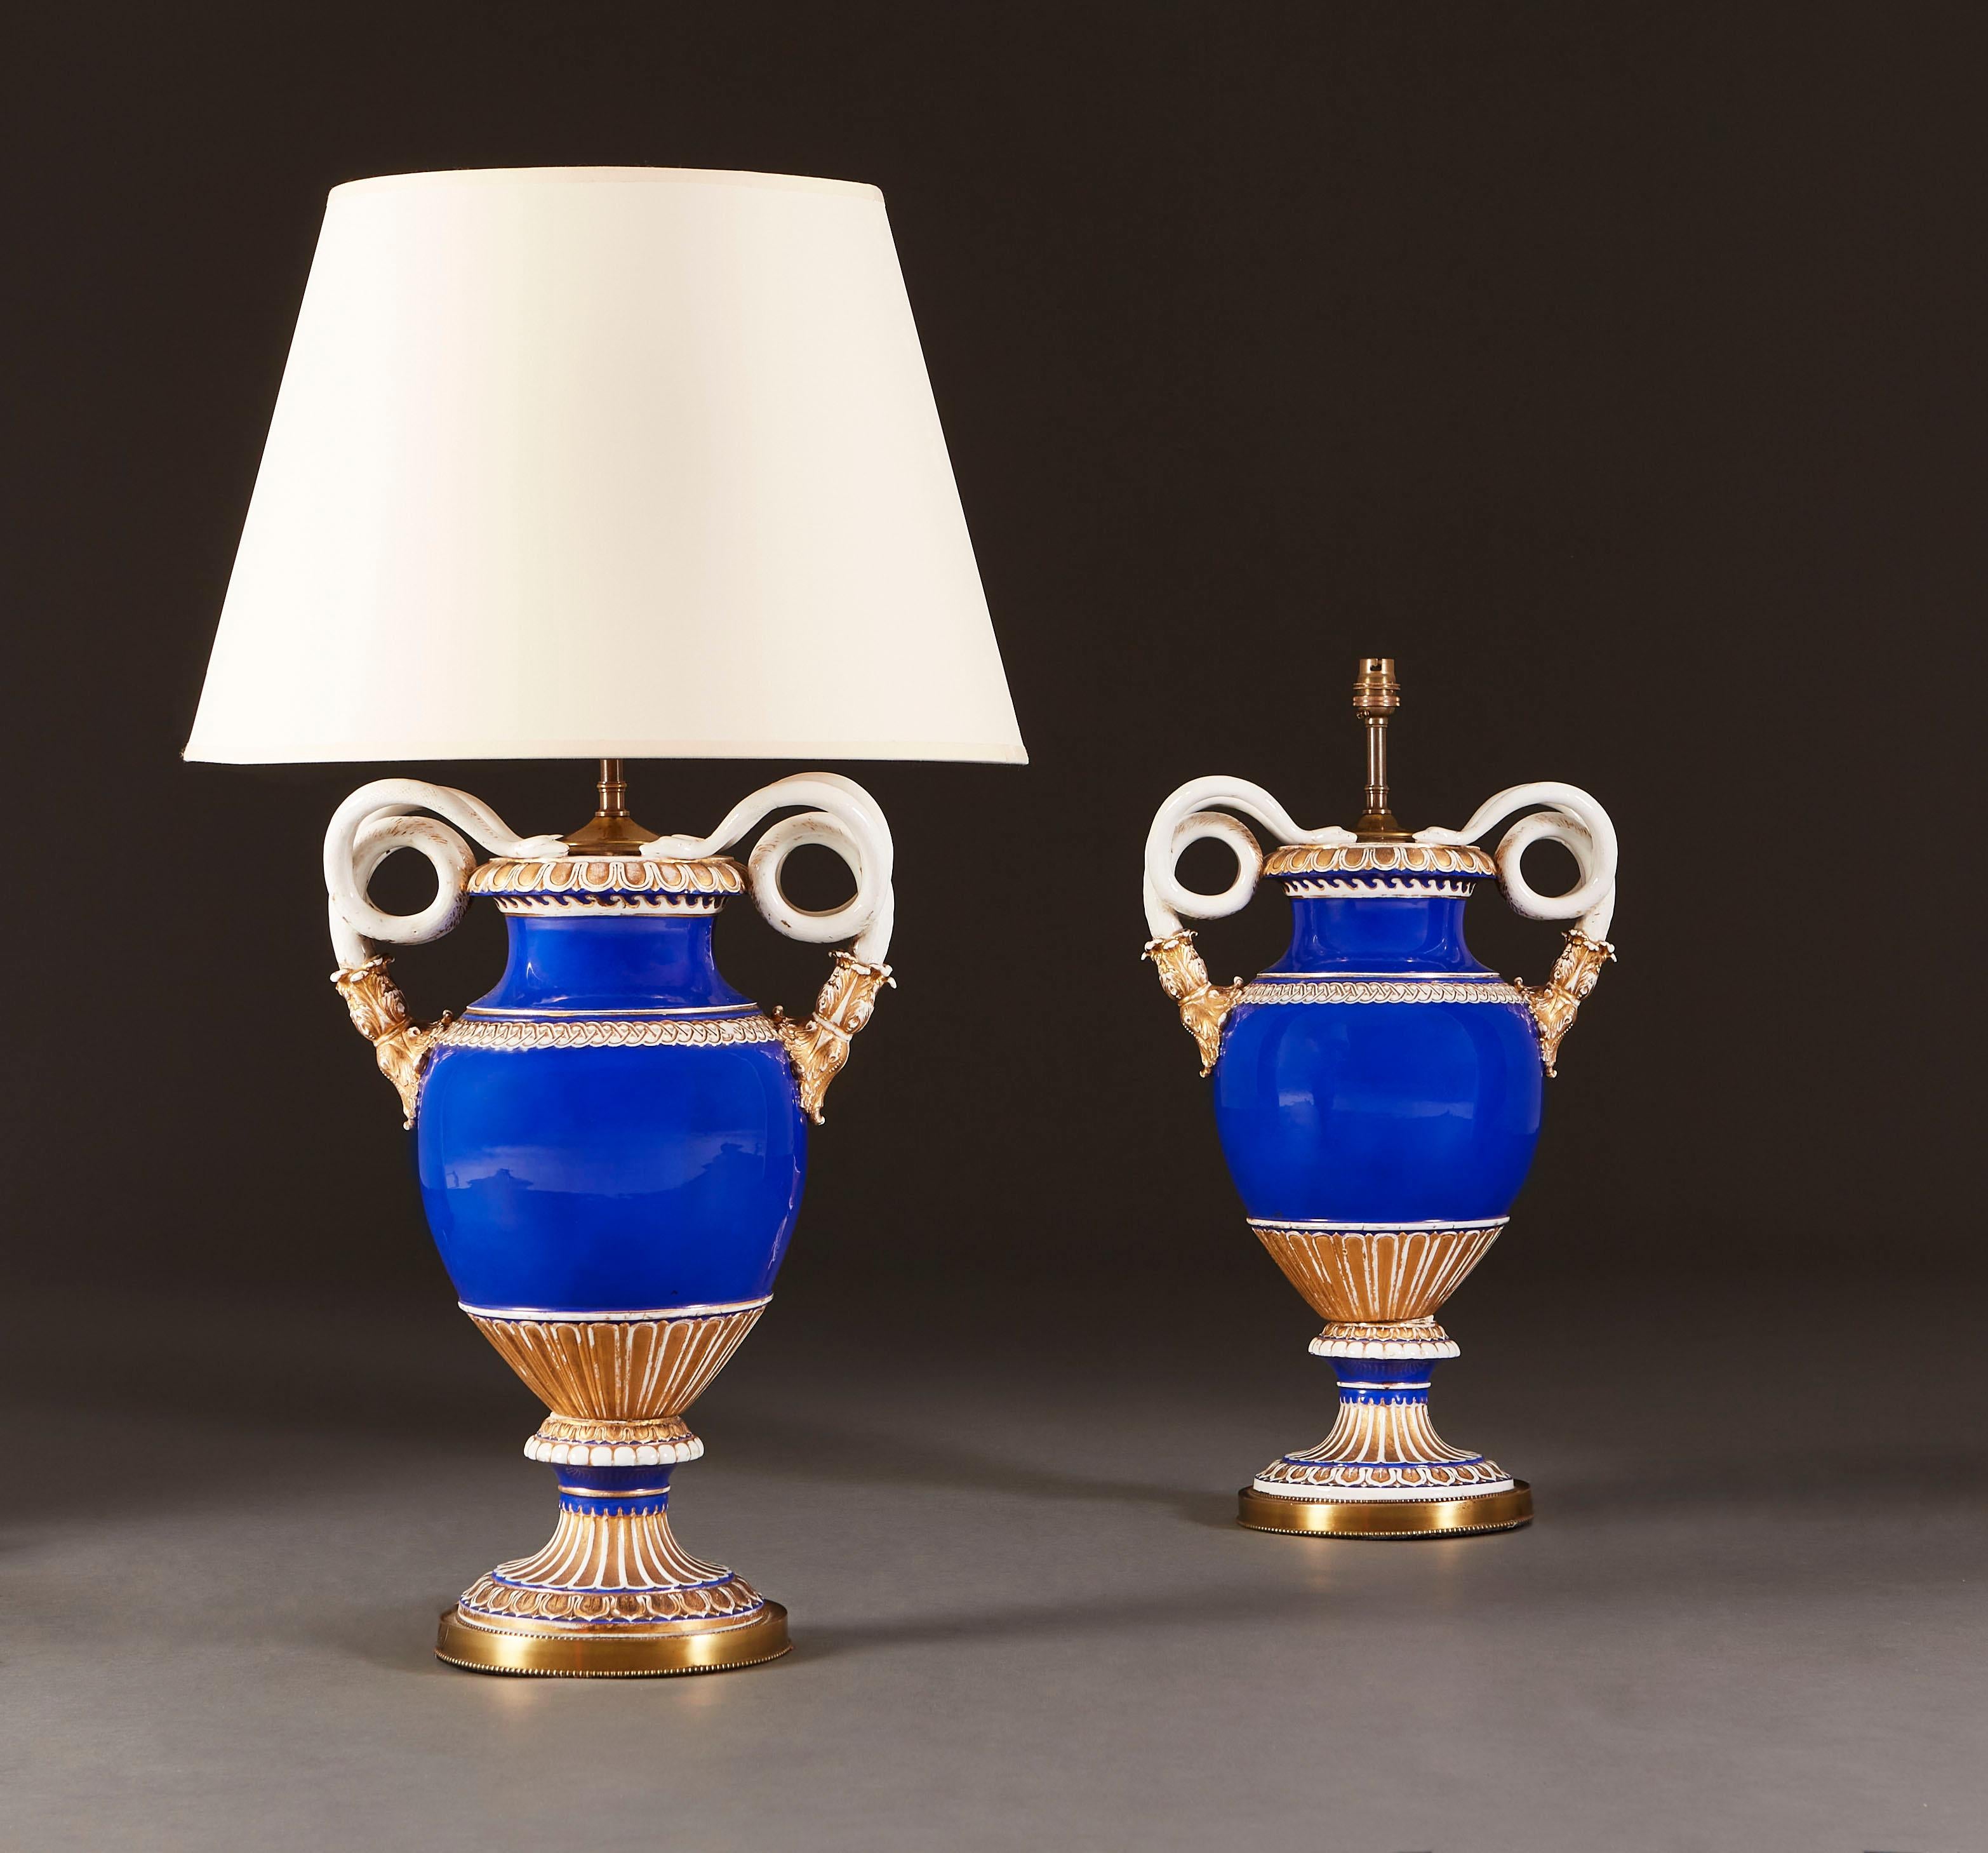 An unusual pair of large Meissen table lamps with scroll arms decorated with a blue glaze and gilding throughout.

Currently wired for the UK. Please enquire for rewiring services.

Please note: Lampshades not included.